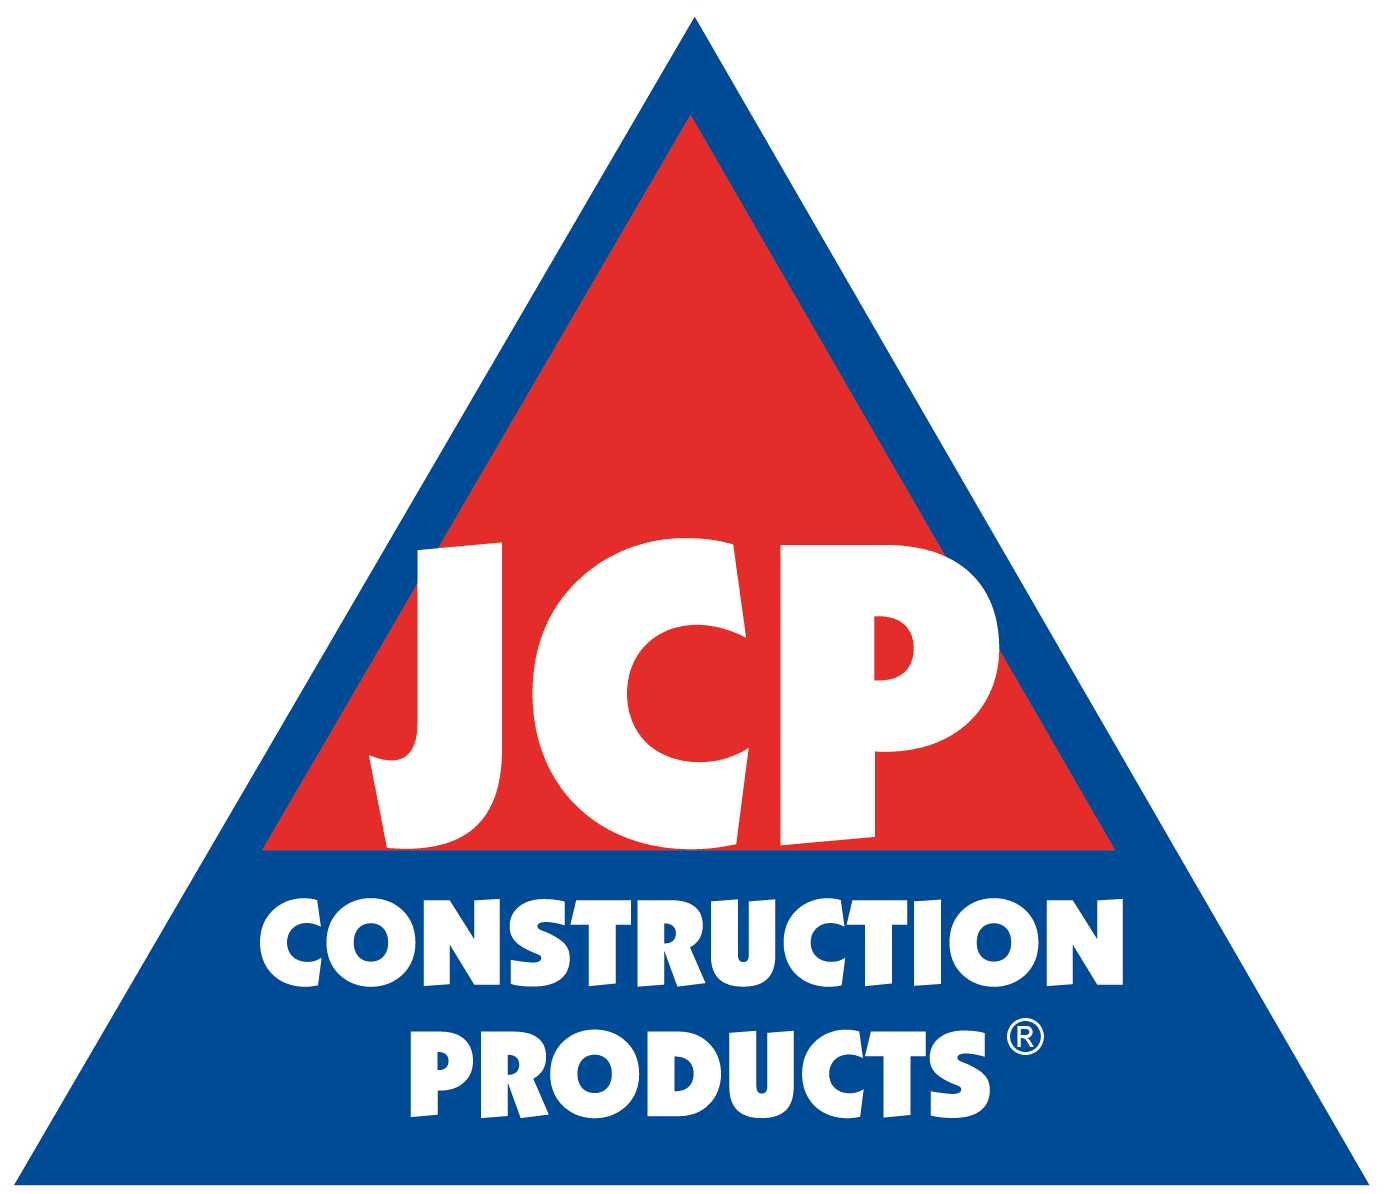 Blue and red triangle with JCP construction products written in.